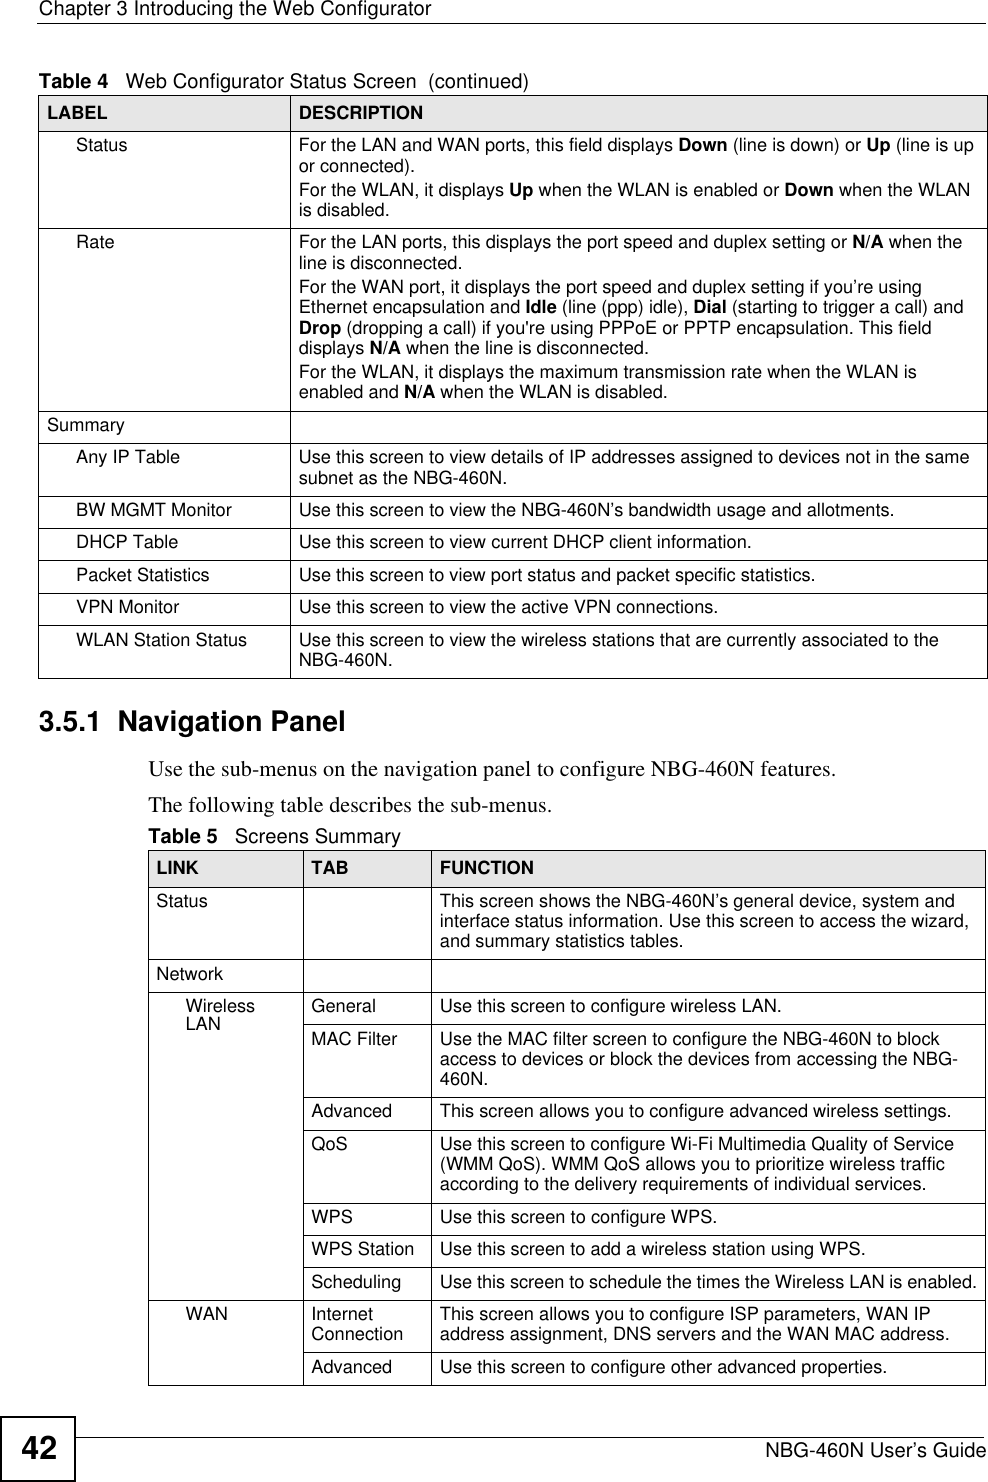 Chapter 3 Introducing the Web ConfiguratorNBG-460N User’s Guide423.5.1  Navigation PanelUse the sub-menus on the navigation panel to configure NBG-460N features. The following table describes the sub-menus.Status For the LAN and WAN ports, this field displays Down (line is down) or Up (line is up or connected).For the WLAN, it displays Up when the WLAN is enabled or Down when the WLAN is disabled.Rate For the LAN ports, this displays the port speed and duplex setting or N/A when the line is disconnected.For the WAN port, it displays the port speed and duplex setting if you’re using Ethernet encapsulation and Idle (line (ppp) idle), Dial (starting to trigger a call) and Drop (dropping a call) if you&apos;re using PPPoE or PPTP encapsulation. This field displays N/A when the line is disconnected.For the WLAN, it displays the maximum transmission rate when the WLAN is enabled and N/A when the WLAN is disabled.SummaryAny IP Table Use this screen to view details of IP addresses assigned to devices not in the same subnet as the NBG-460N.BW MGMT Monitor Use this screen to view the NBG-460N’s bandwidth usage and allotments.DHCP Table Use this screen to view current DHCP client information.Packet Statistics Use this screen to view port status and packet specific statistics.VPN Monitor Use this screen to view the active VPN connections.WLAN Station Status Use this screen to view the wireless stations that are currently associated to the NBG-460N.Table 4   Web Configurator Status Screen  (continued) LABEL DESCRIPTIONTable 5   Screens SummaryLINK TAB FUNCTIONStatus This screen shows the NBG-460N’s general device, system and interface status information. Use this screen to access the wizard, and summary statistics tables.NetworkWirelessLAN General Use this screen to configure wireless LAN.MAC Filter Use the MAC filter screen to configure the NBG-460N to block access to devices or block the devices from accessing the NBG-460N.Advanced This screen allows you to configure advanced wireless settings.QoS Use this screen to configure Wi-Fi Multimedia Quality of Service (WMM QoS). WMM QoS allows you to prioritize wireless traffic according to the delivery requirements of individual services.WPS Use this screen to configure WPS.WPS Station Use this screen to add a wireless station using WPS.Scheduling Use this screen to schedule the times the Wireless LAN is enabled.WAN Internet Connection This screen allows you to configure ISP parameters, WAN IP address assignment, DNS servers and the WAN MAC address. Advanced Use this screen to configure other advanced properties.